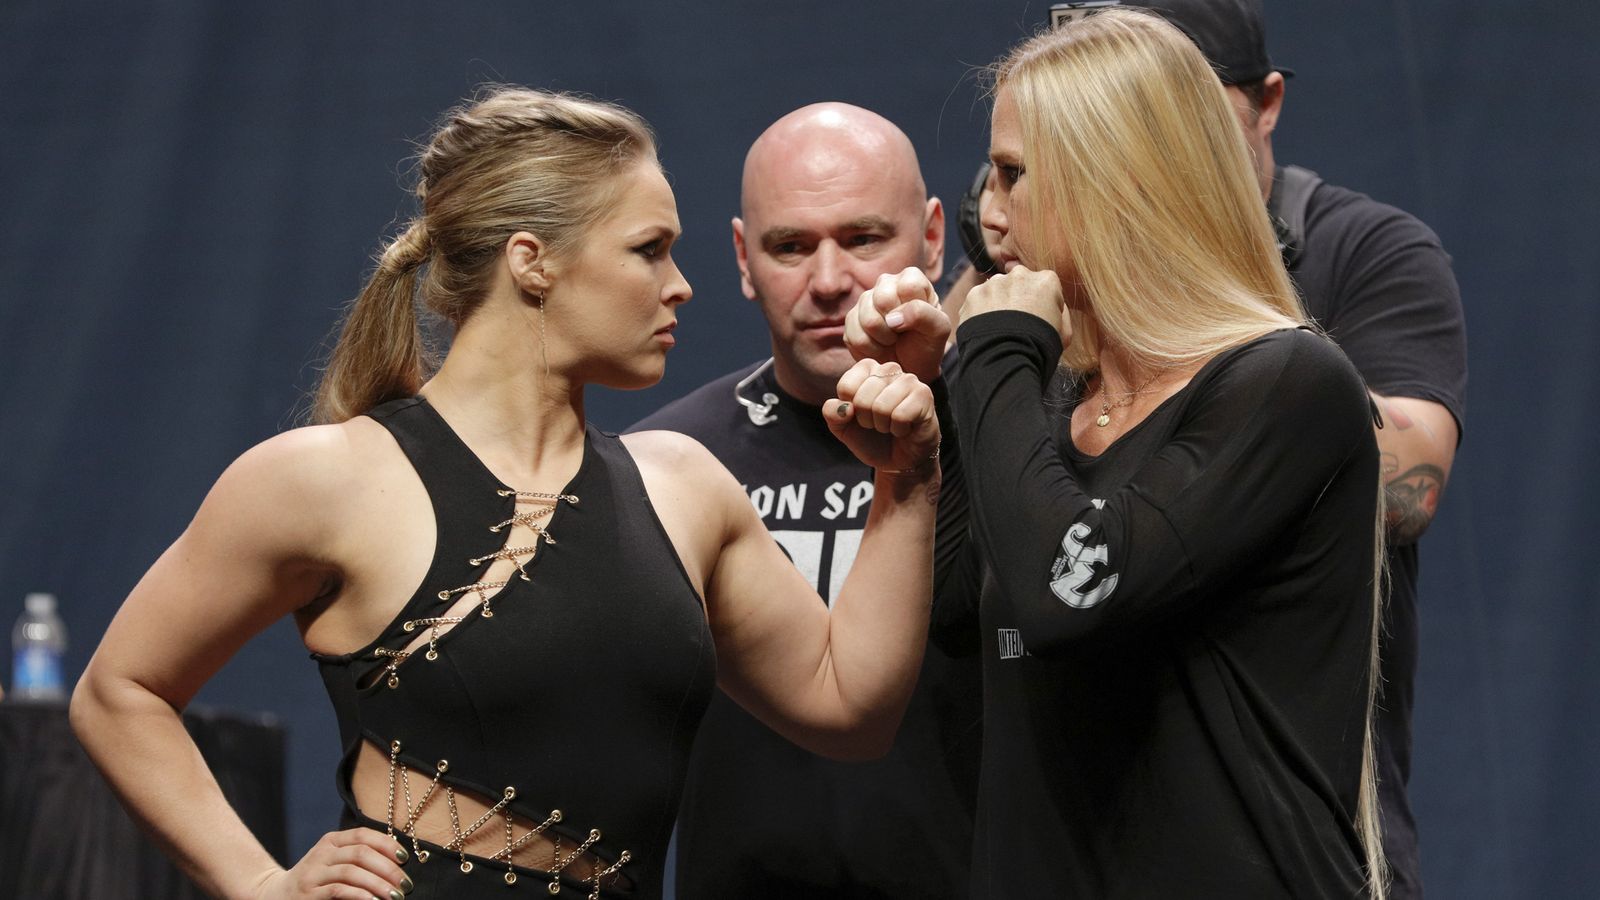 UFC 193 Preview: Ronda Rousey vs. Holly Holm